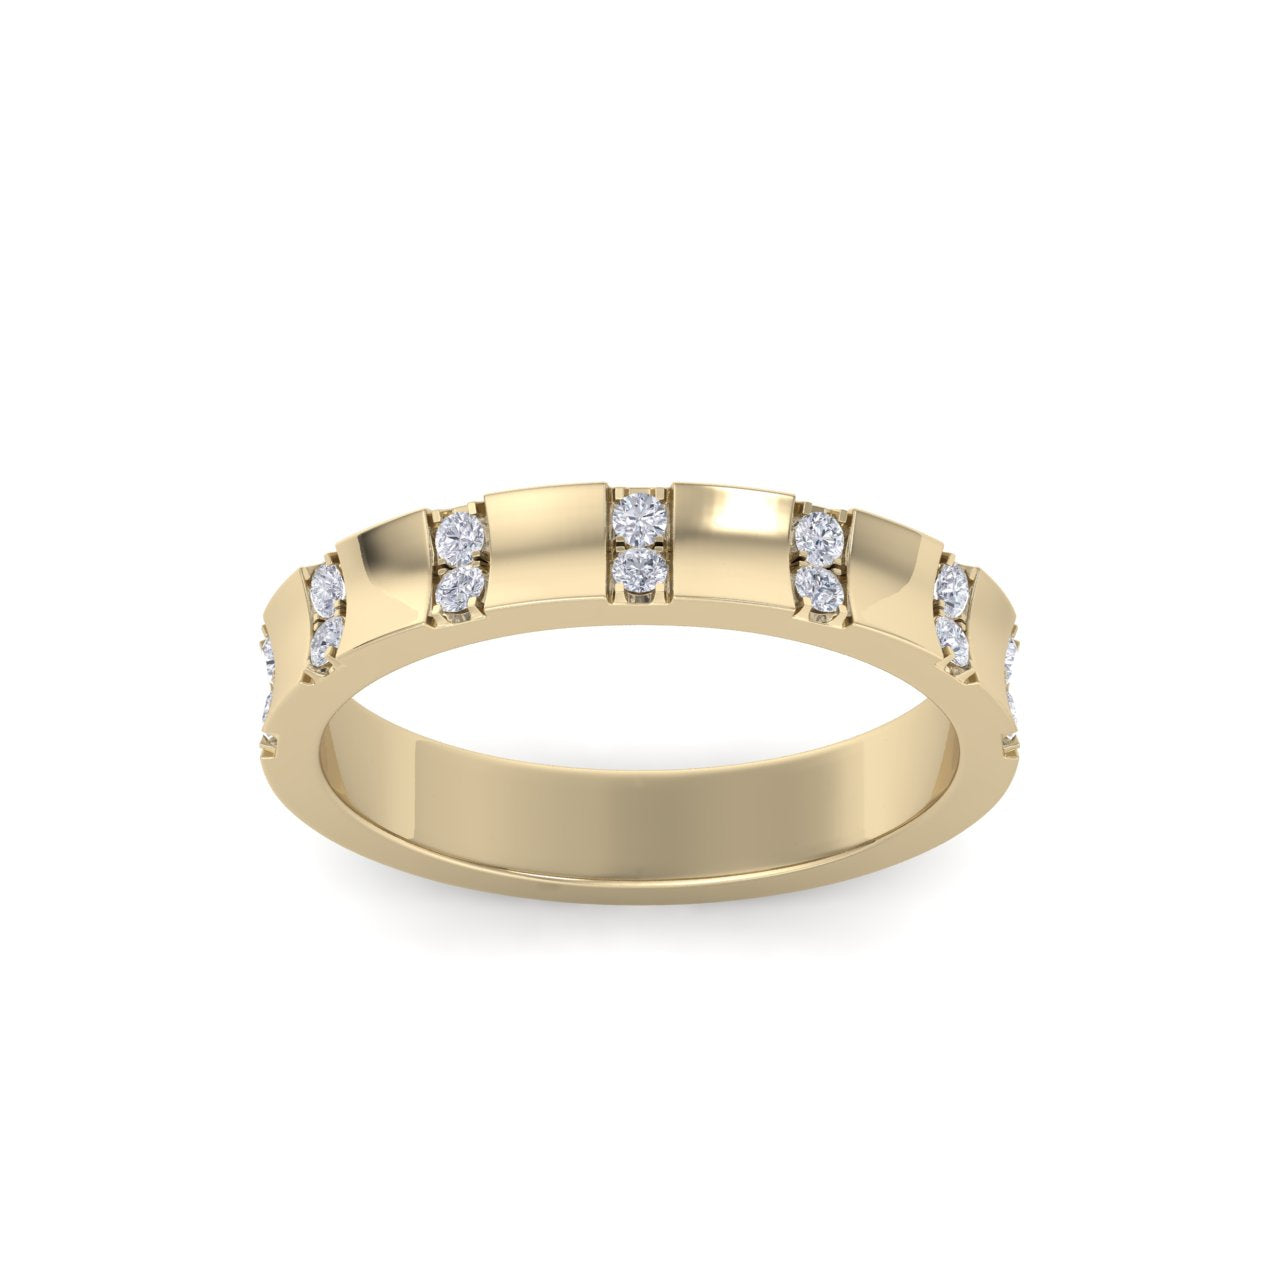 Diamond ring in yellow gold with white diamonds of 0.21 ct in weight